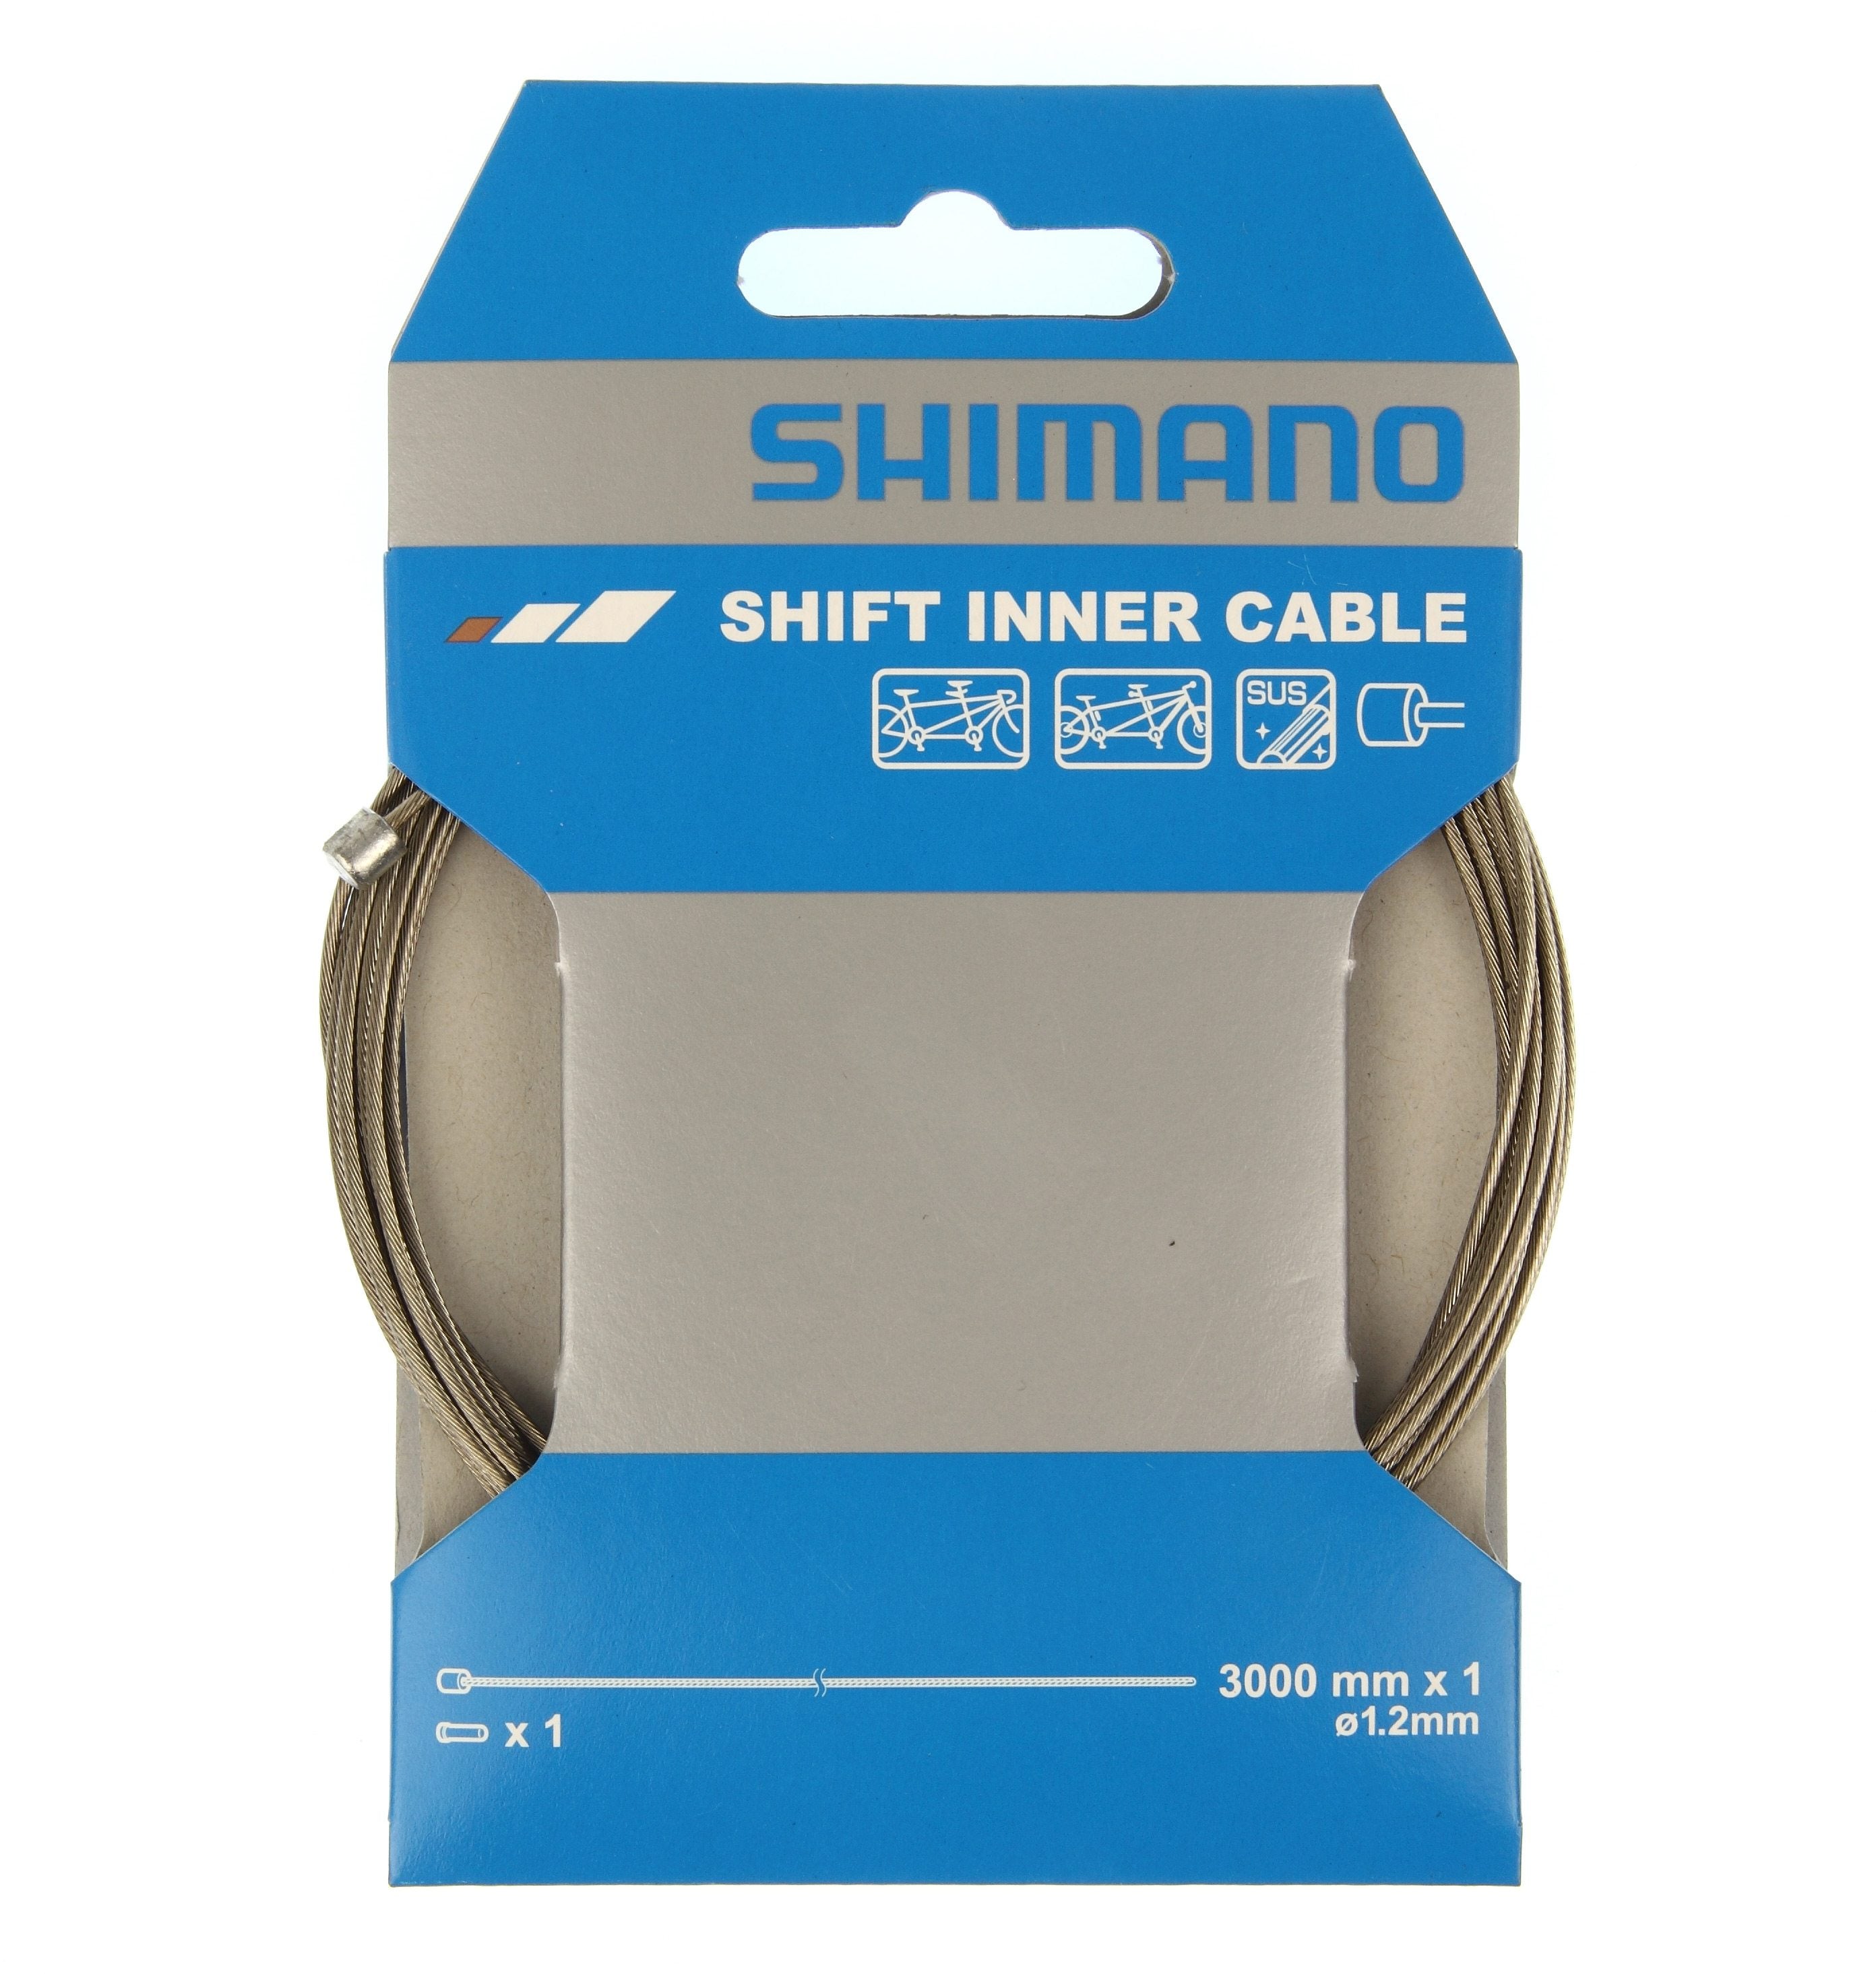 Shimano Road / MTB tandem stainless steel gear inner wire, 1.2 x 3000 mm, single